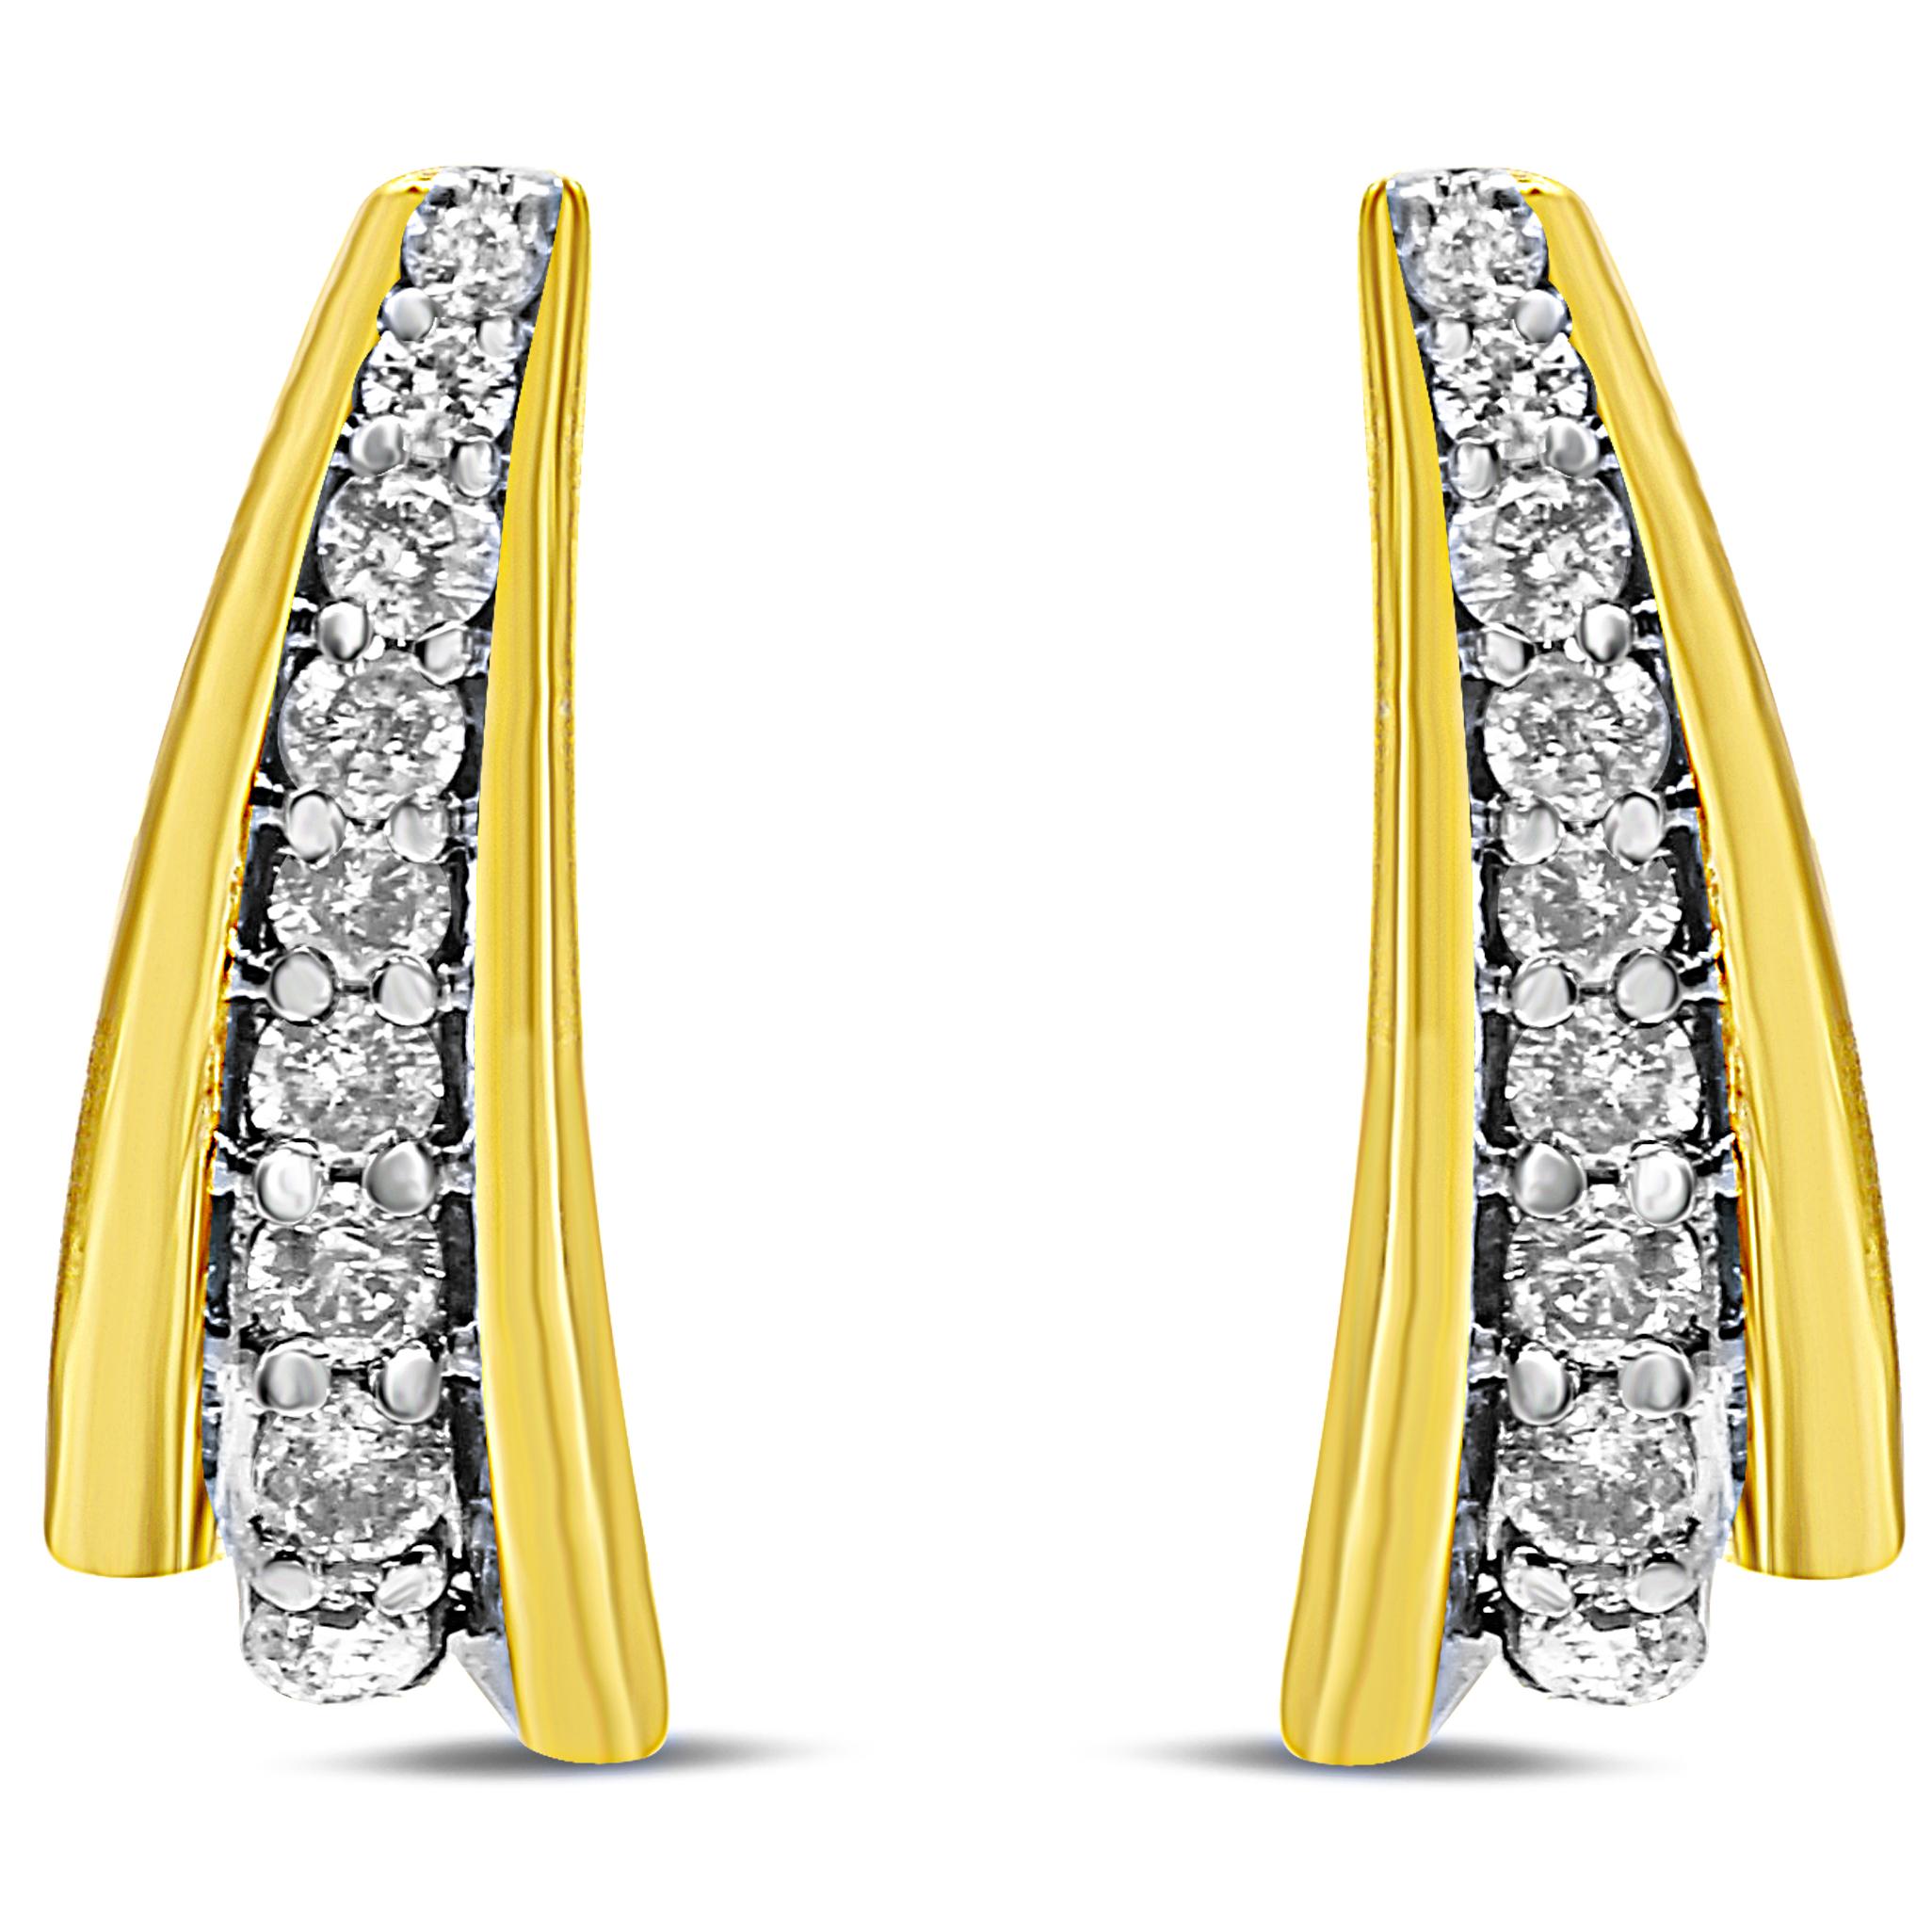 Light up the room in these dazzling huggie earrings for her. This pair of stud earrings is styled for length in a downward swish with a gradual increase of the diamond size for a look that sizzles with sophistication. The sparkling prong-set